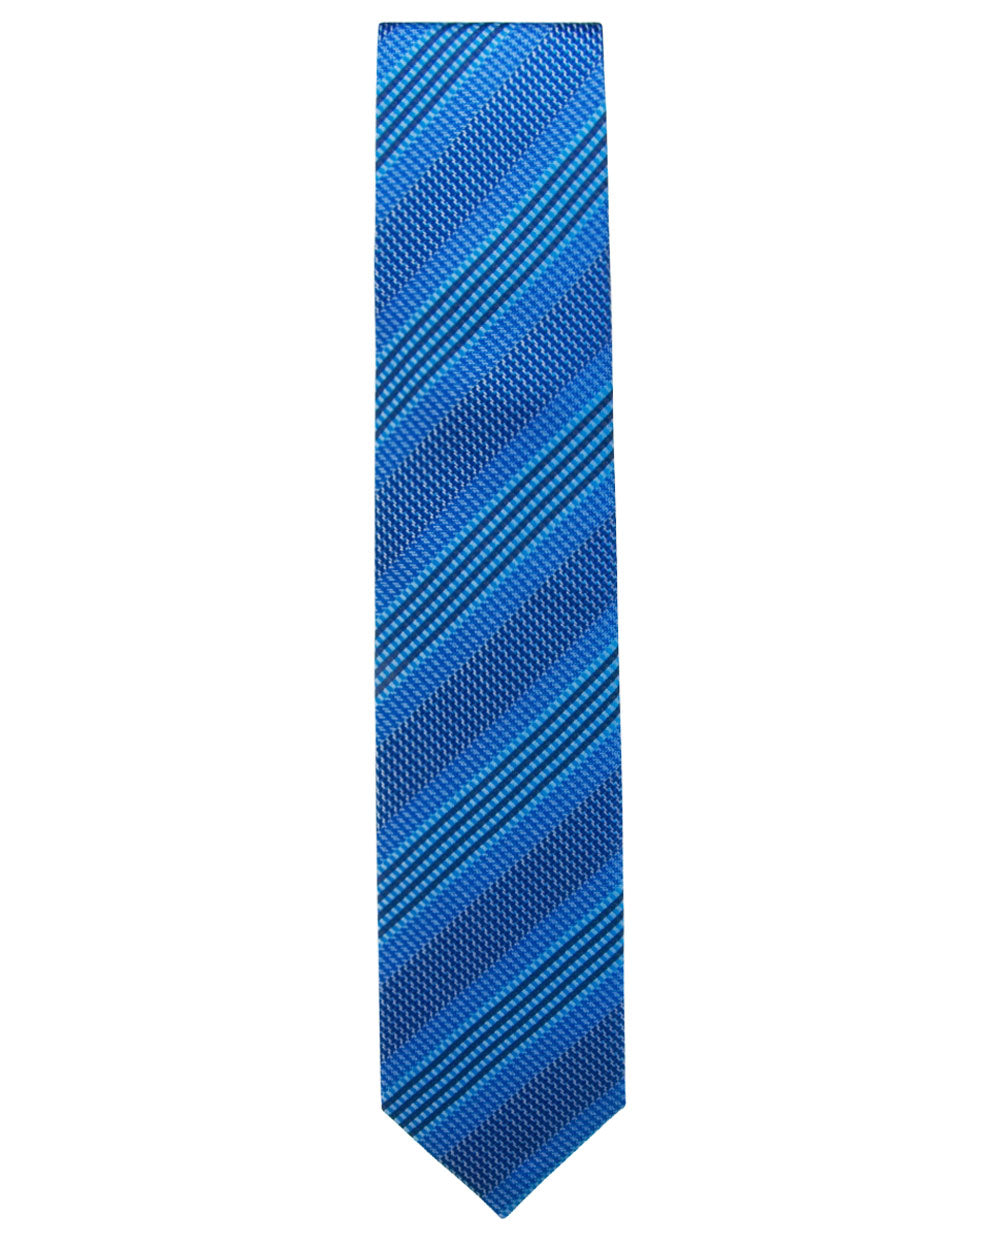 Navy and Bright Blue Striped Tie